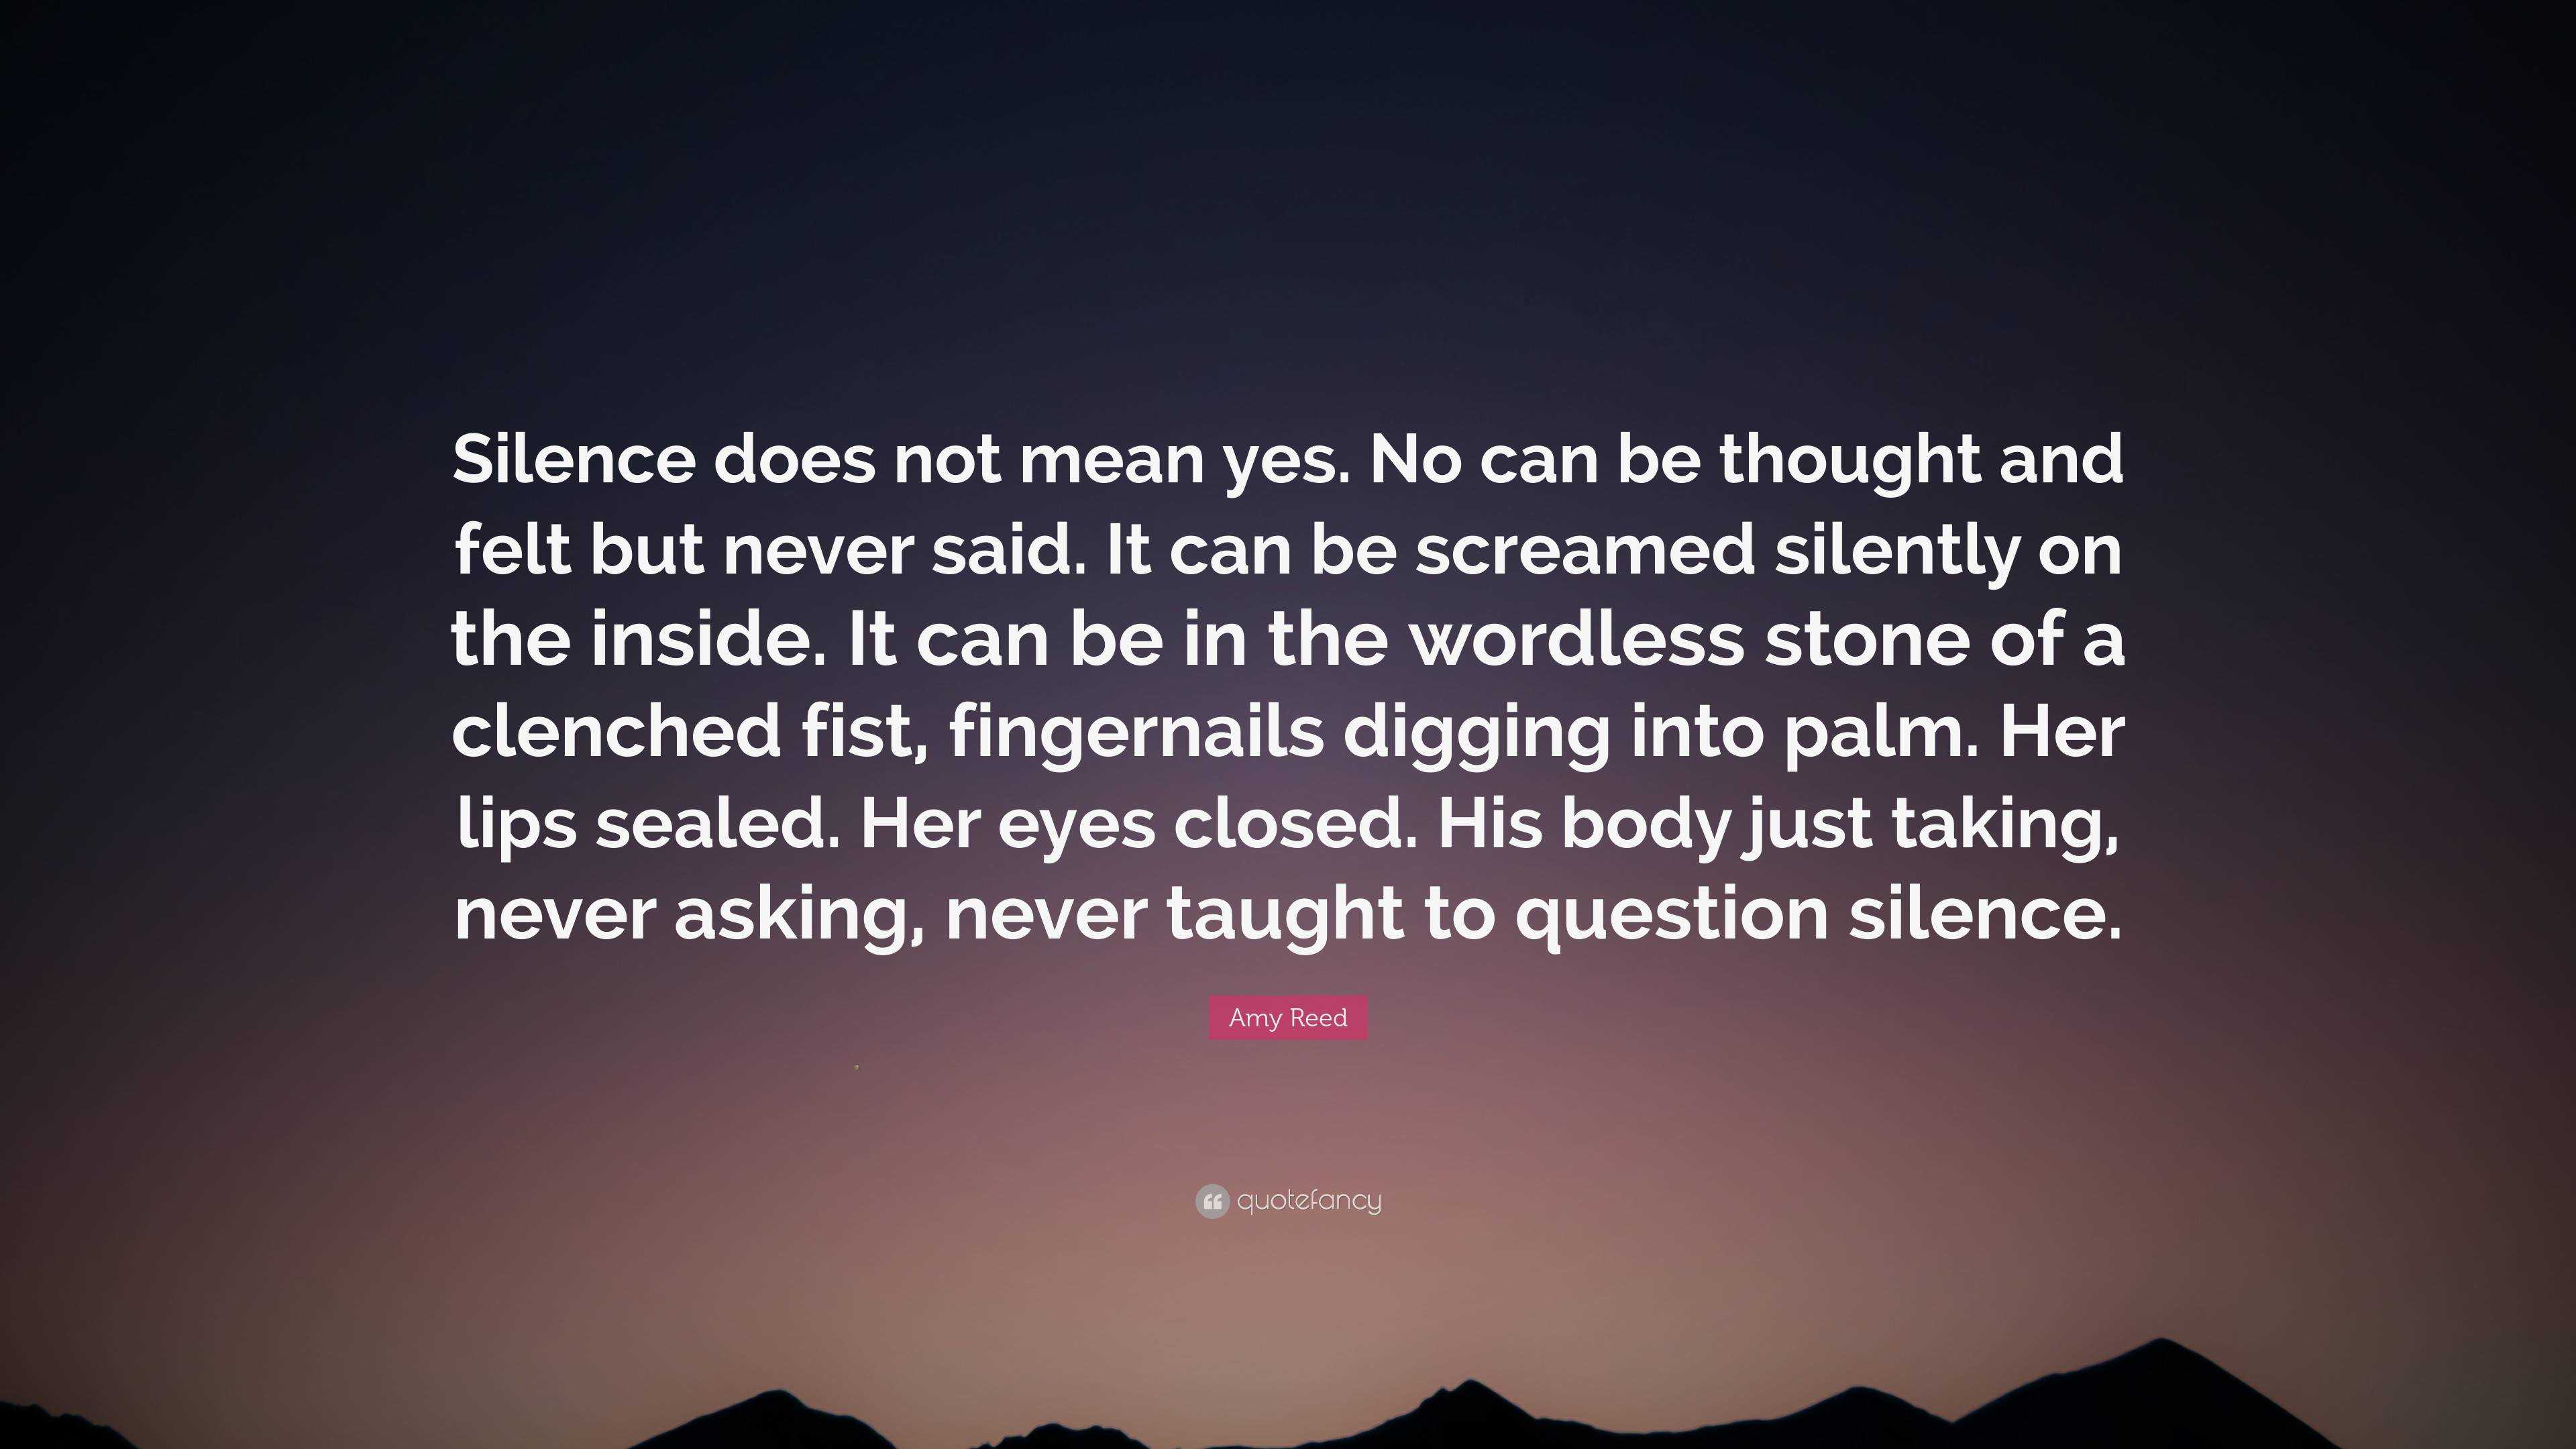 Amy Reed Quote “Silence does not mean yes. No can be thought and felt